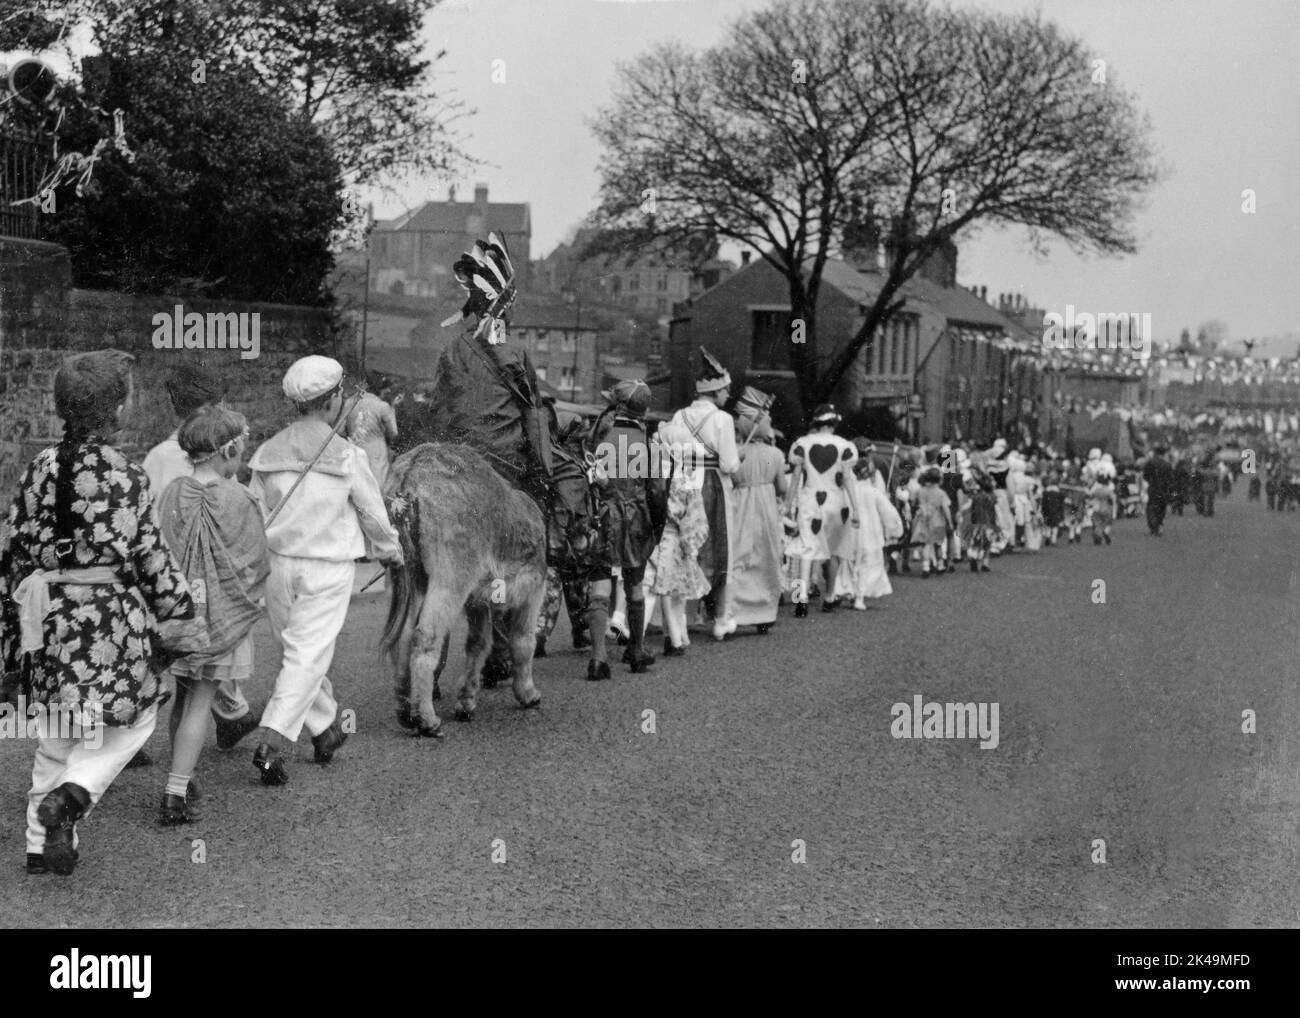 Children in fancy dress, including a boy riding a donkey, walk in procession on 6 May 1935, the Silver Jubilee Day of King George V, down a long straight street (probably Wakefield Road) decked with flags and bunting at Denby Dale in West Yorkshire, England, UK. Stock Photo